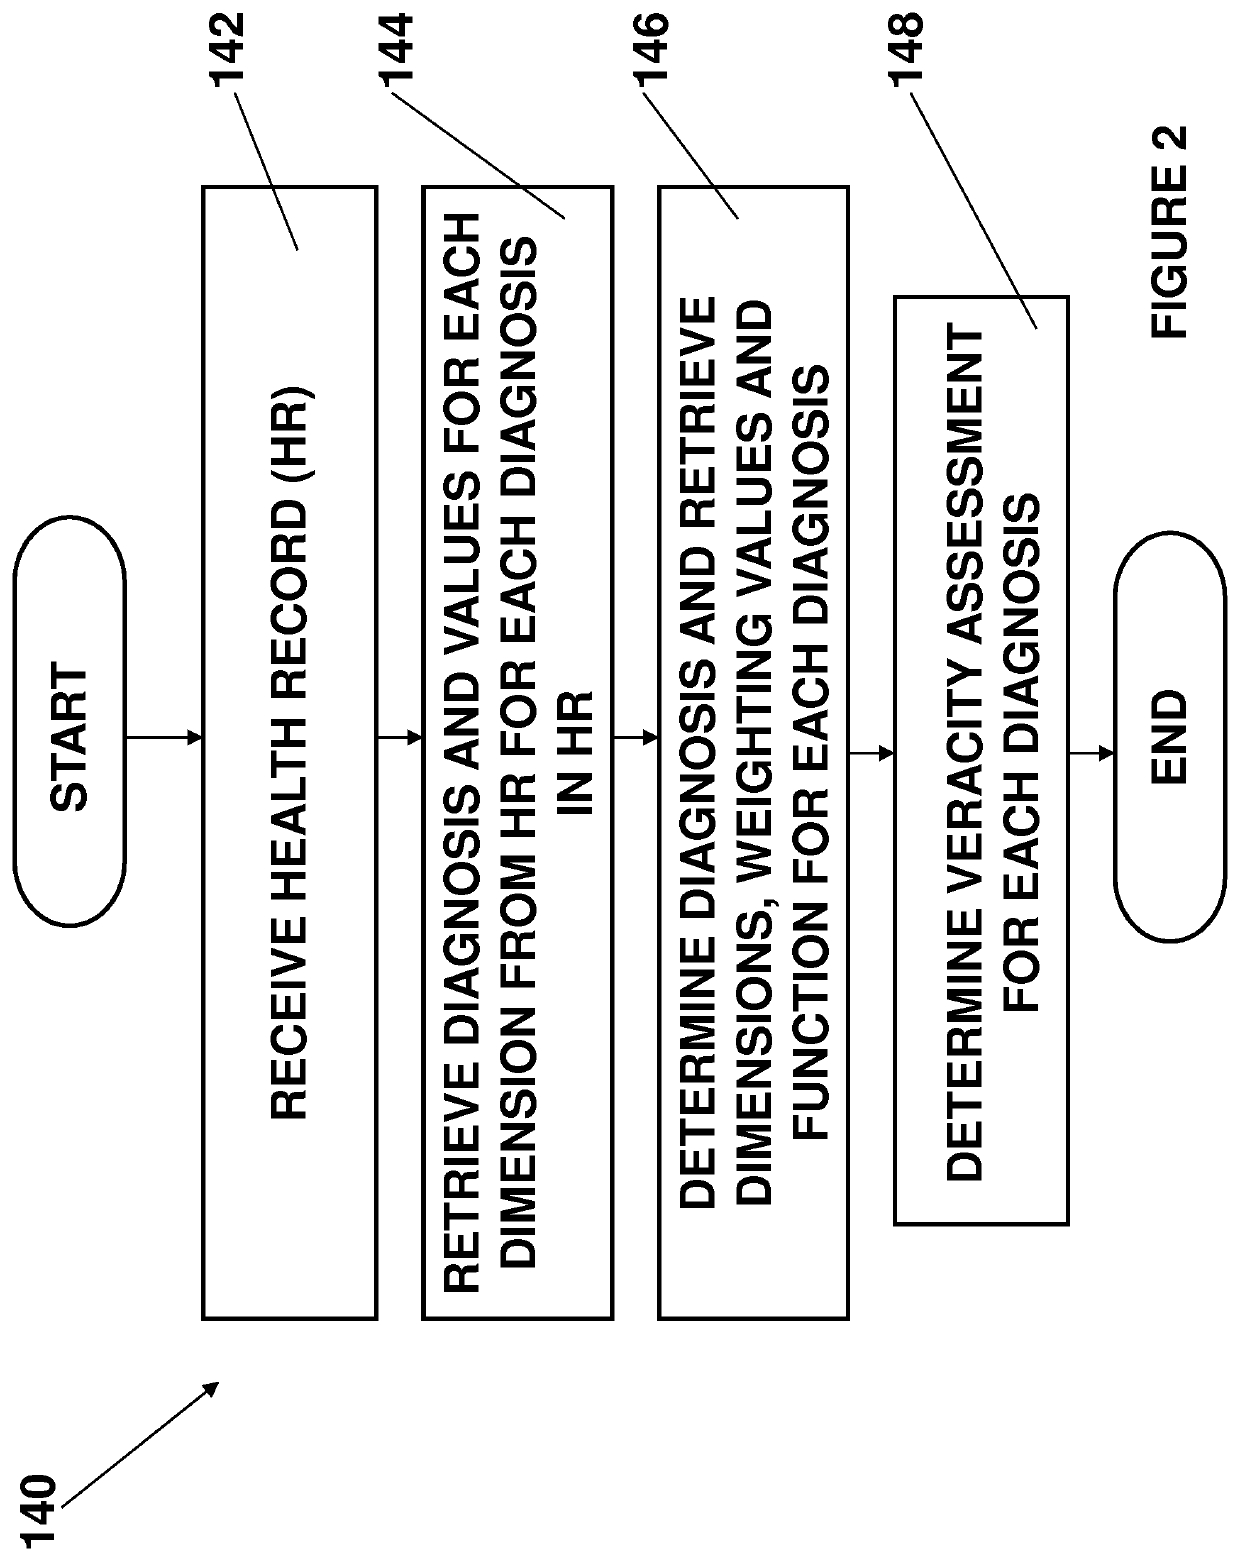 System and method for determining veracity of patient diagnoses within one or more electronic health records